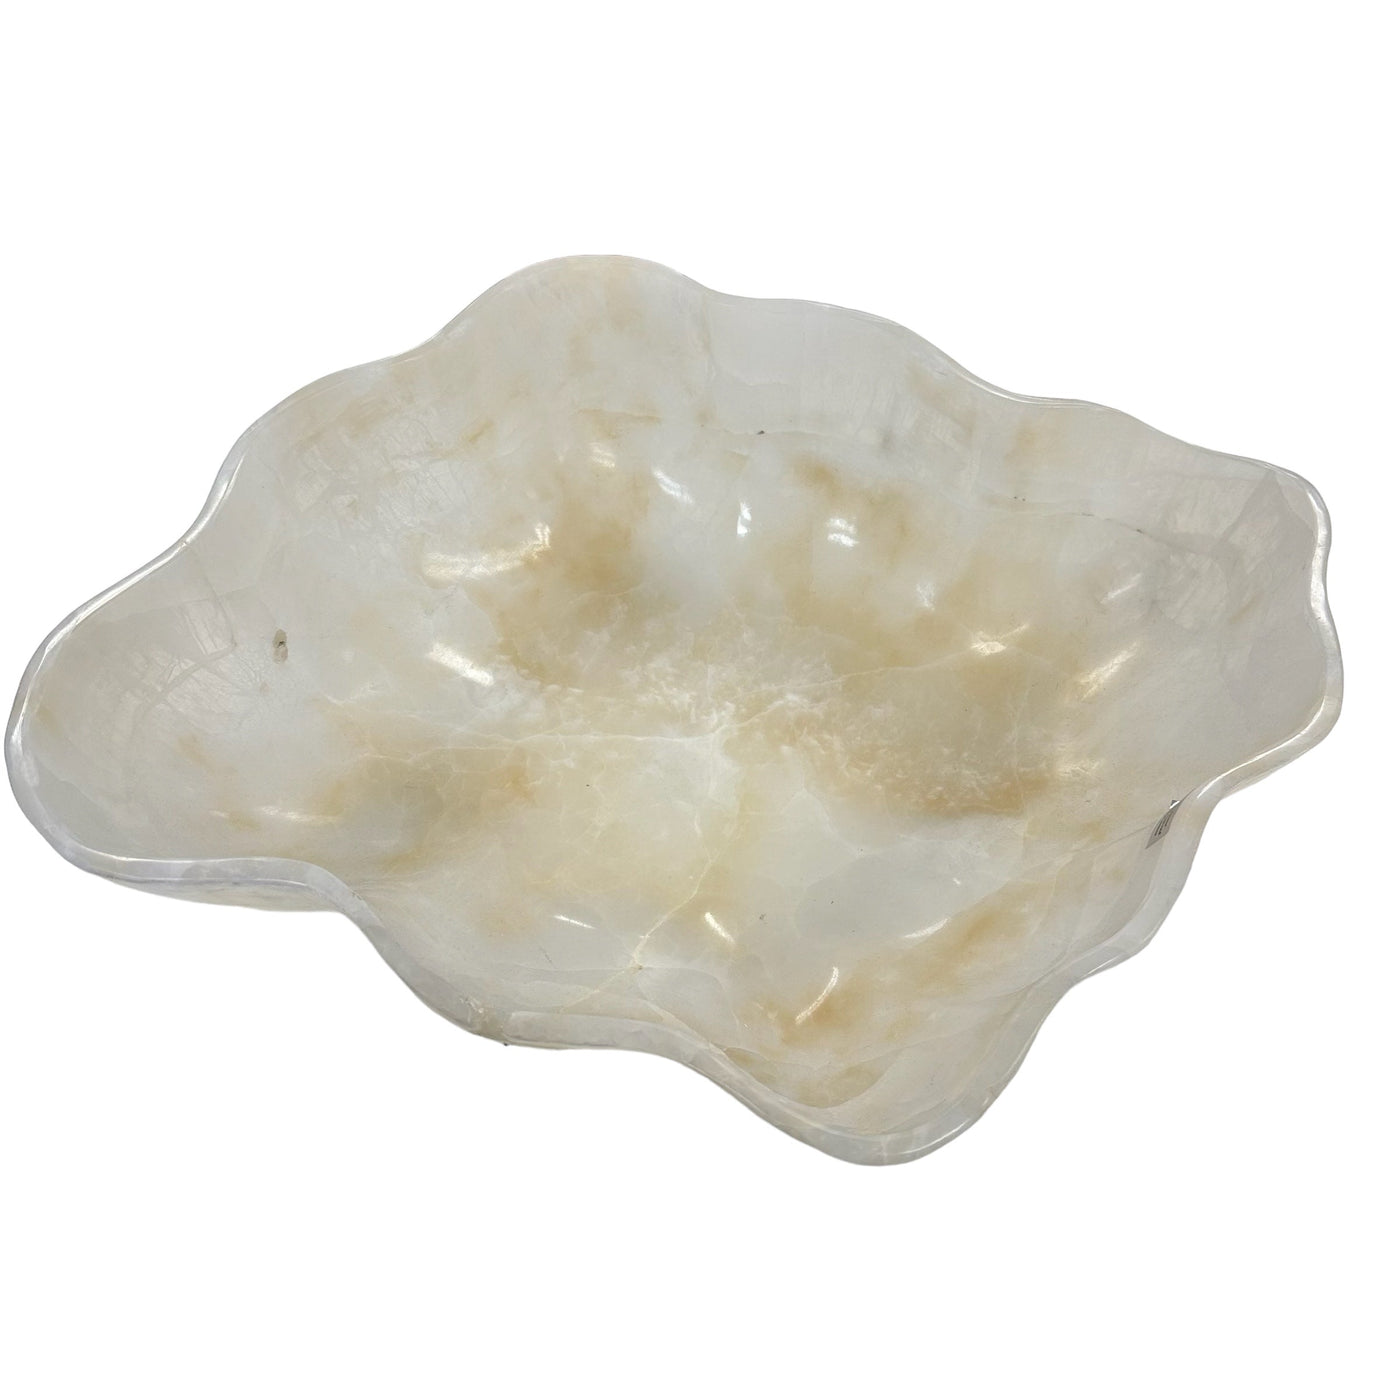 Light Colored Mexican Onyx Bowl - Large Bowl